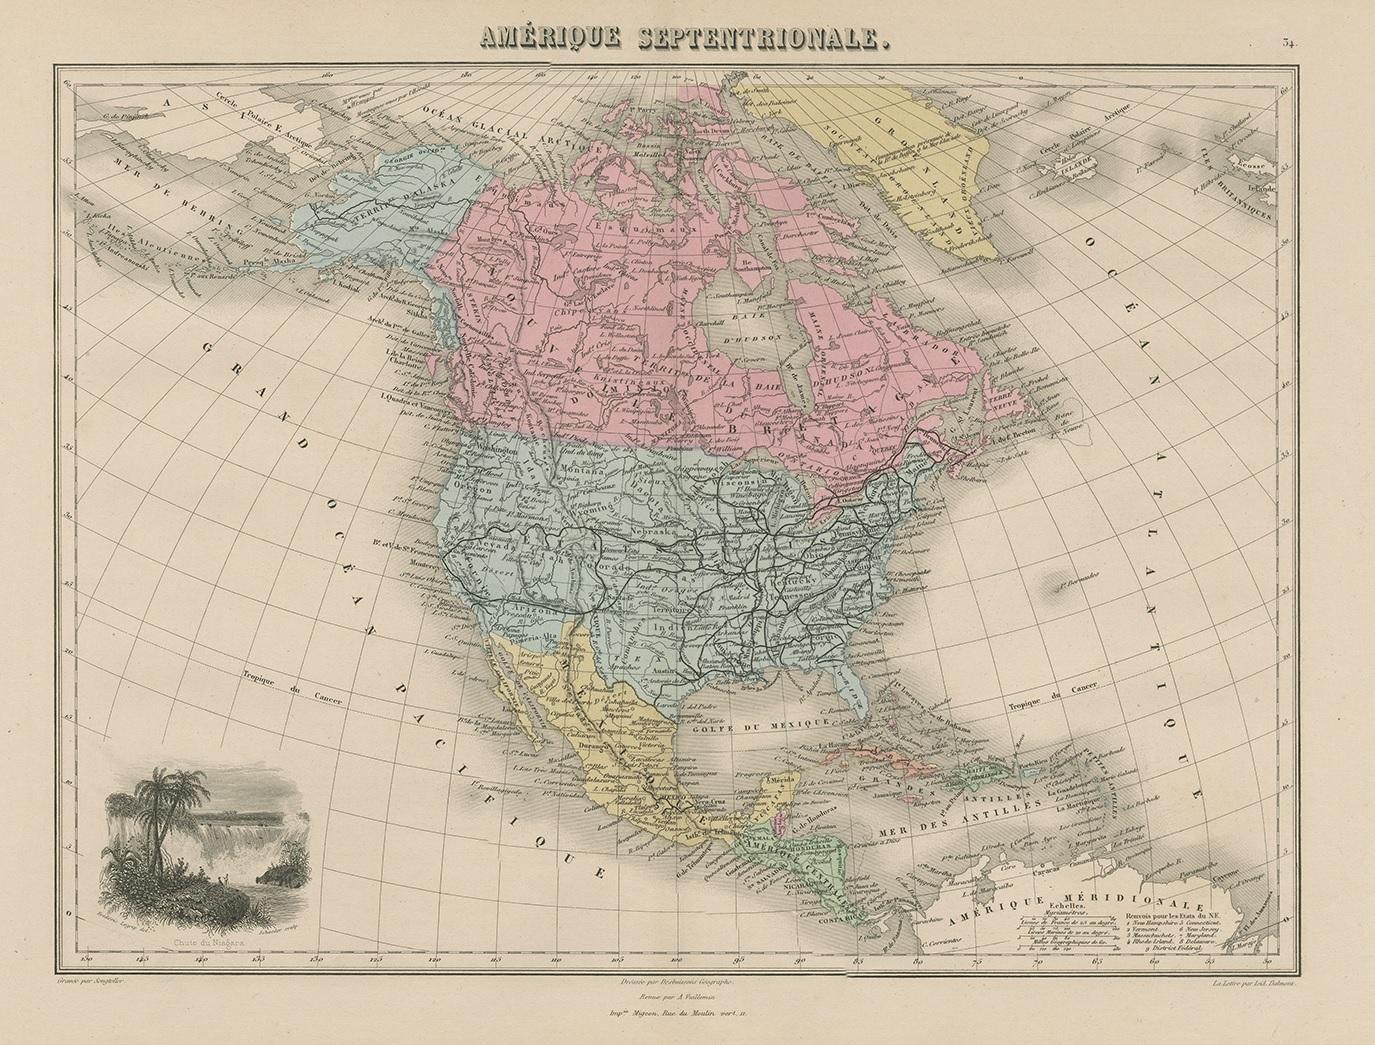 Antique map titled 'Amérique Septentrionale'. Old map of North and Central America. With a decorative vignette of the Niagara Falls. This map originates from 'Géographie Universelle Atlas-Migeon' by J. Migeon.